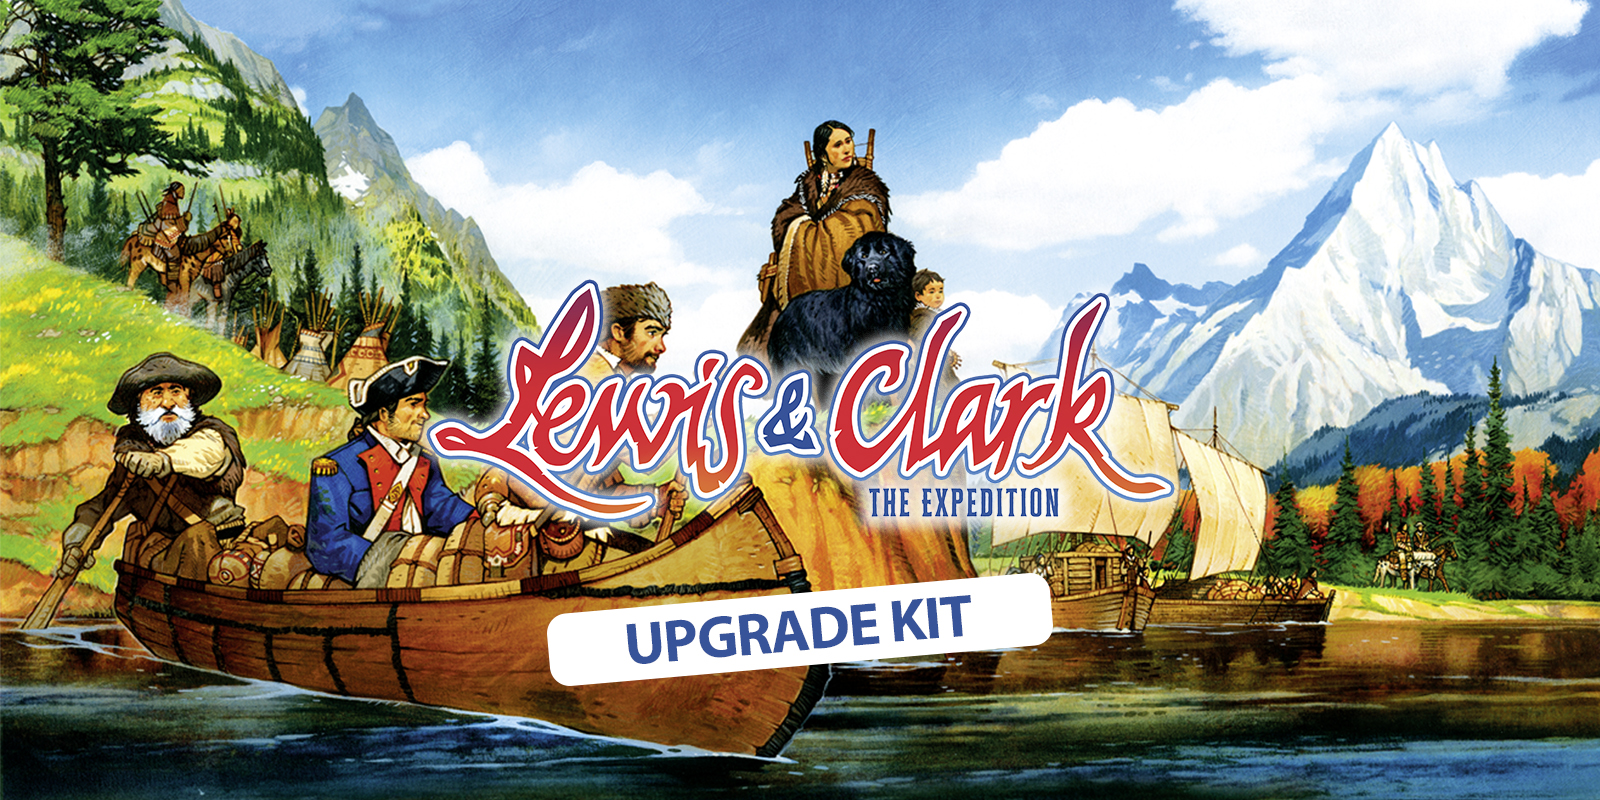 Lewis and Clark Souvenir Playing Cards